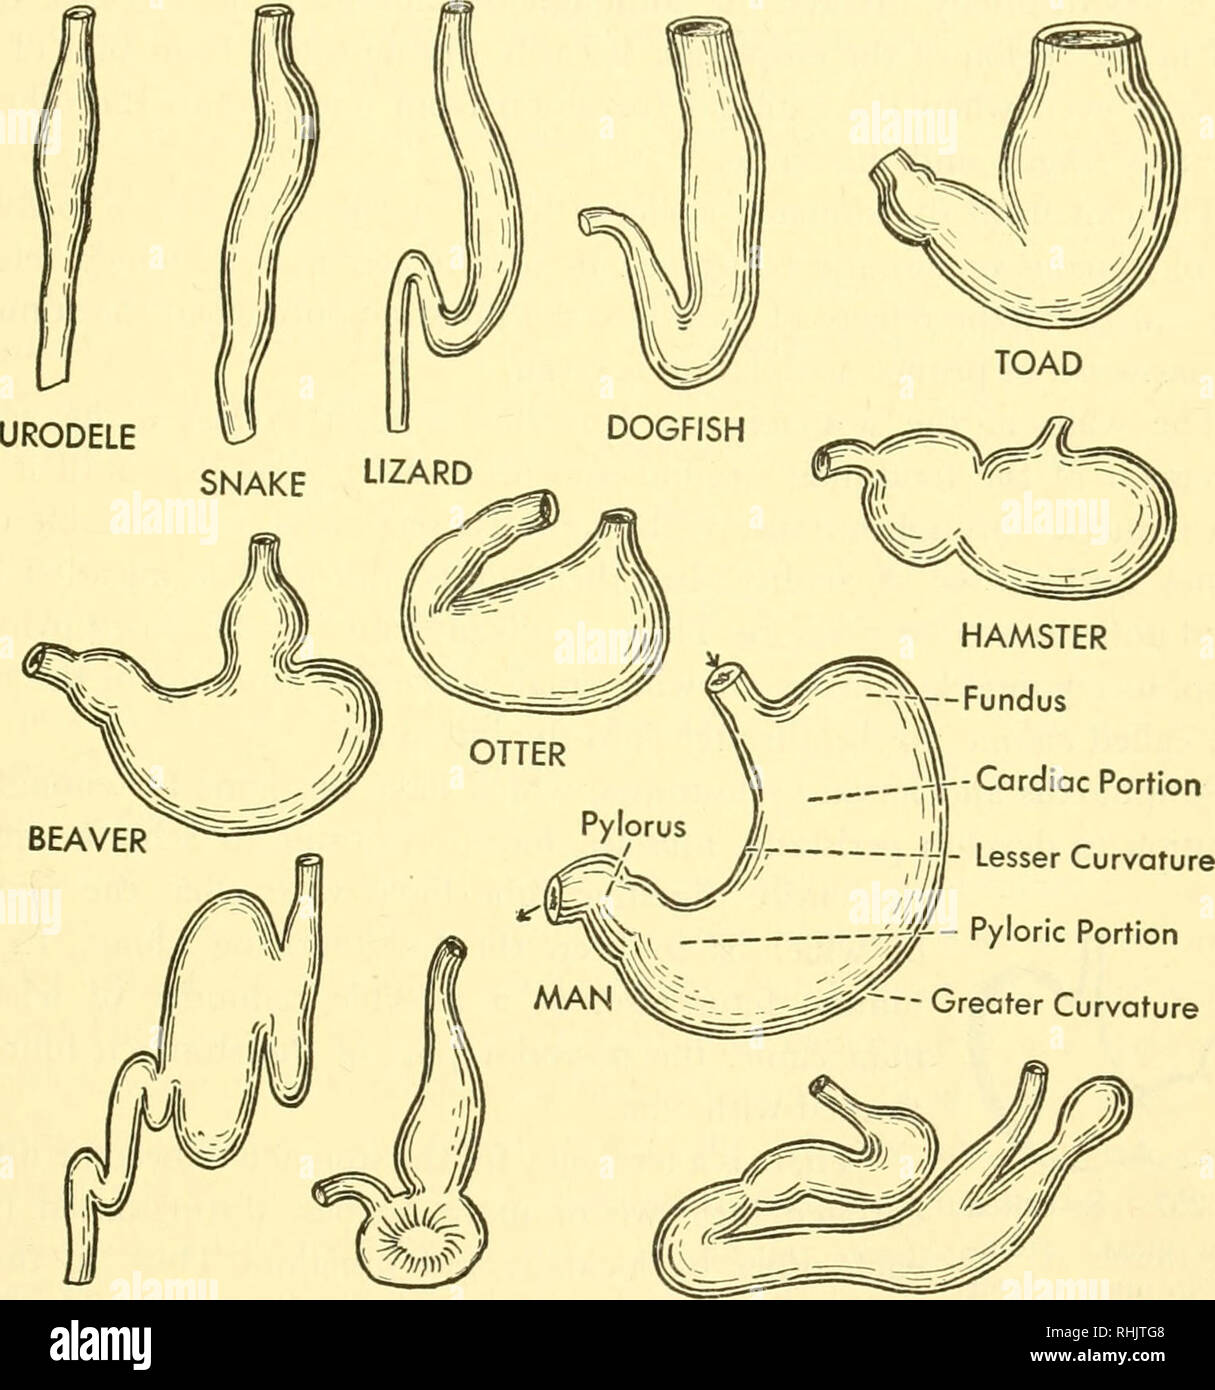 . Biology of the vertebrates : a comparative study of man and his animal allies. Vertebrates; Vertebrates -- Anatomy; Anatomy, Comparative. Intake Apparatus 3°7 fishes and salamanders, it is spindle-shaped and arranged to conform with the general contour of an elongated body, but in higher vertebrates it becomes saclike in shape, assuming a somewhat transverse position in the body cavity. Between these extremes may be found many gradations of form and position.. -j#- Pyloric Portion Greater Curvature SEAL BIRD VAMPIRE BAT Fig. 256. Different stomachs. The stomach of the dogfish, for example, i Stock Photo